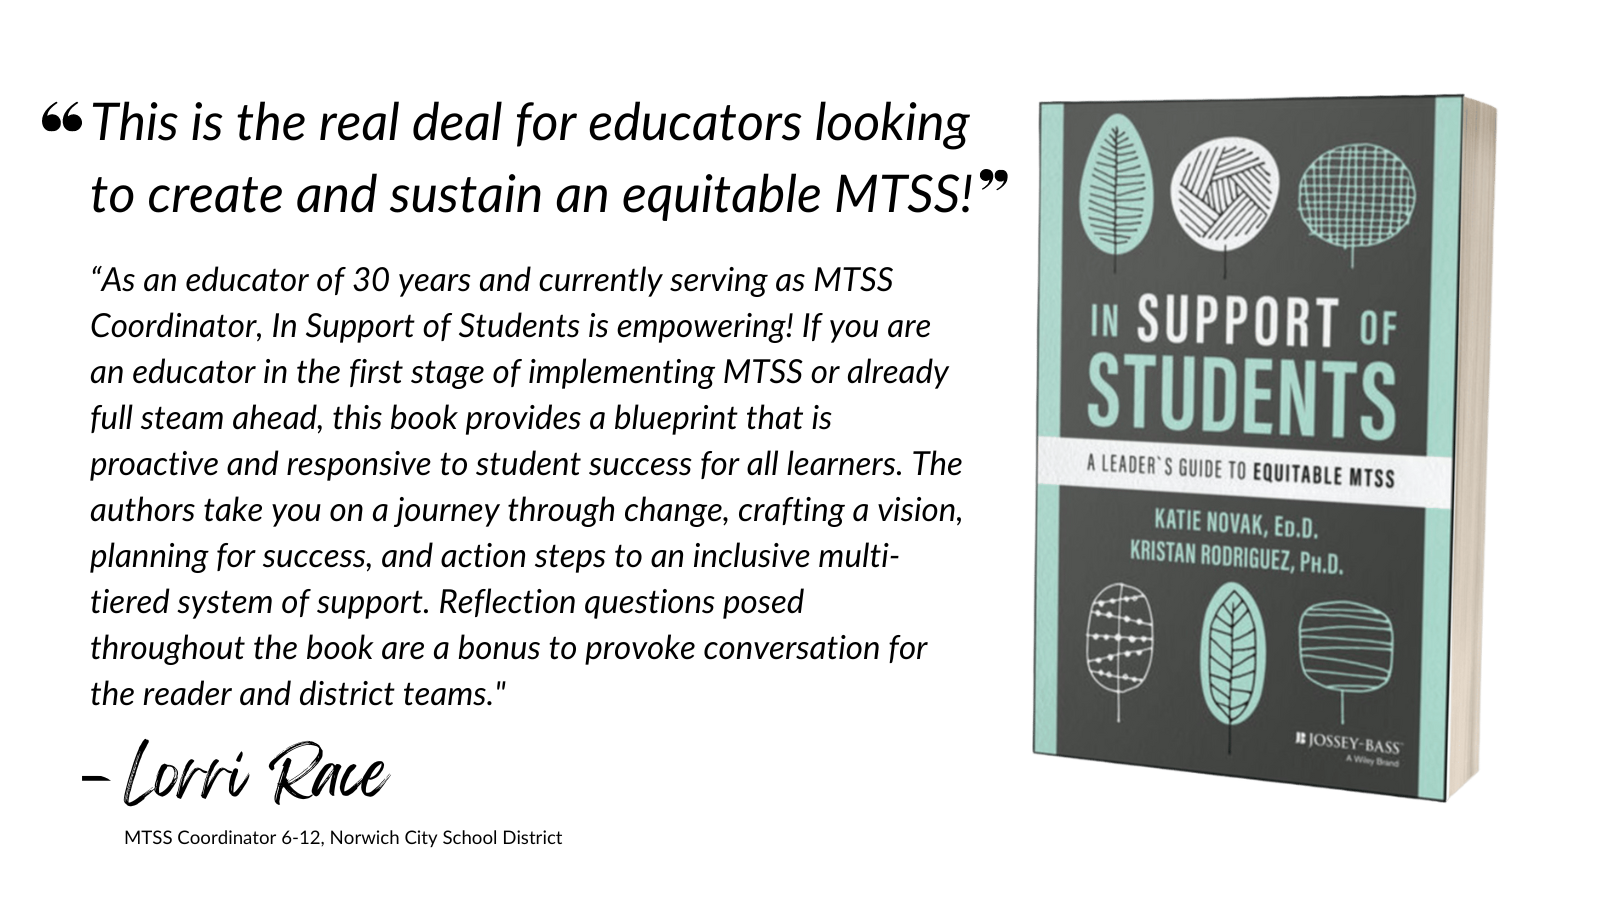 This is the real deal for educators looking to create and sustain an equitable MTSS